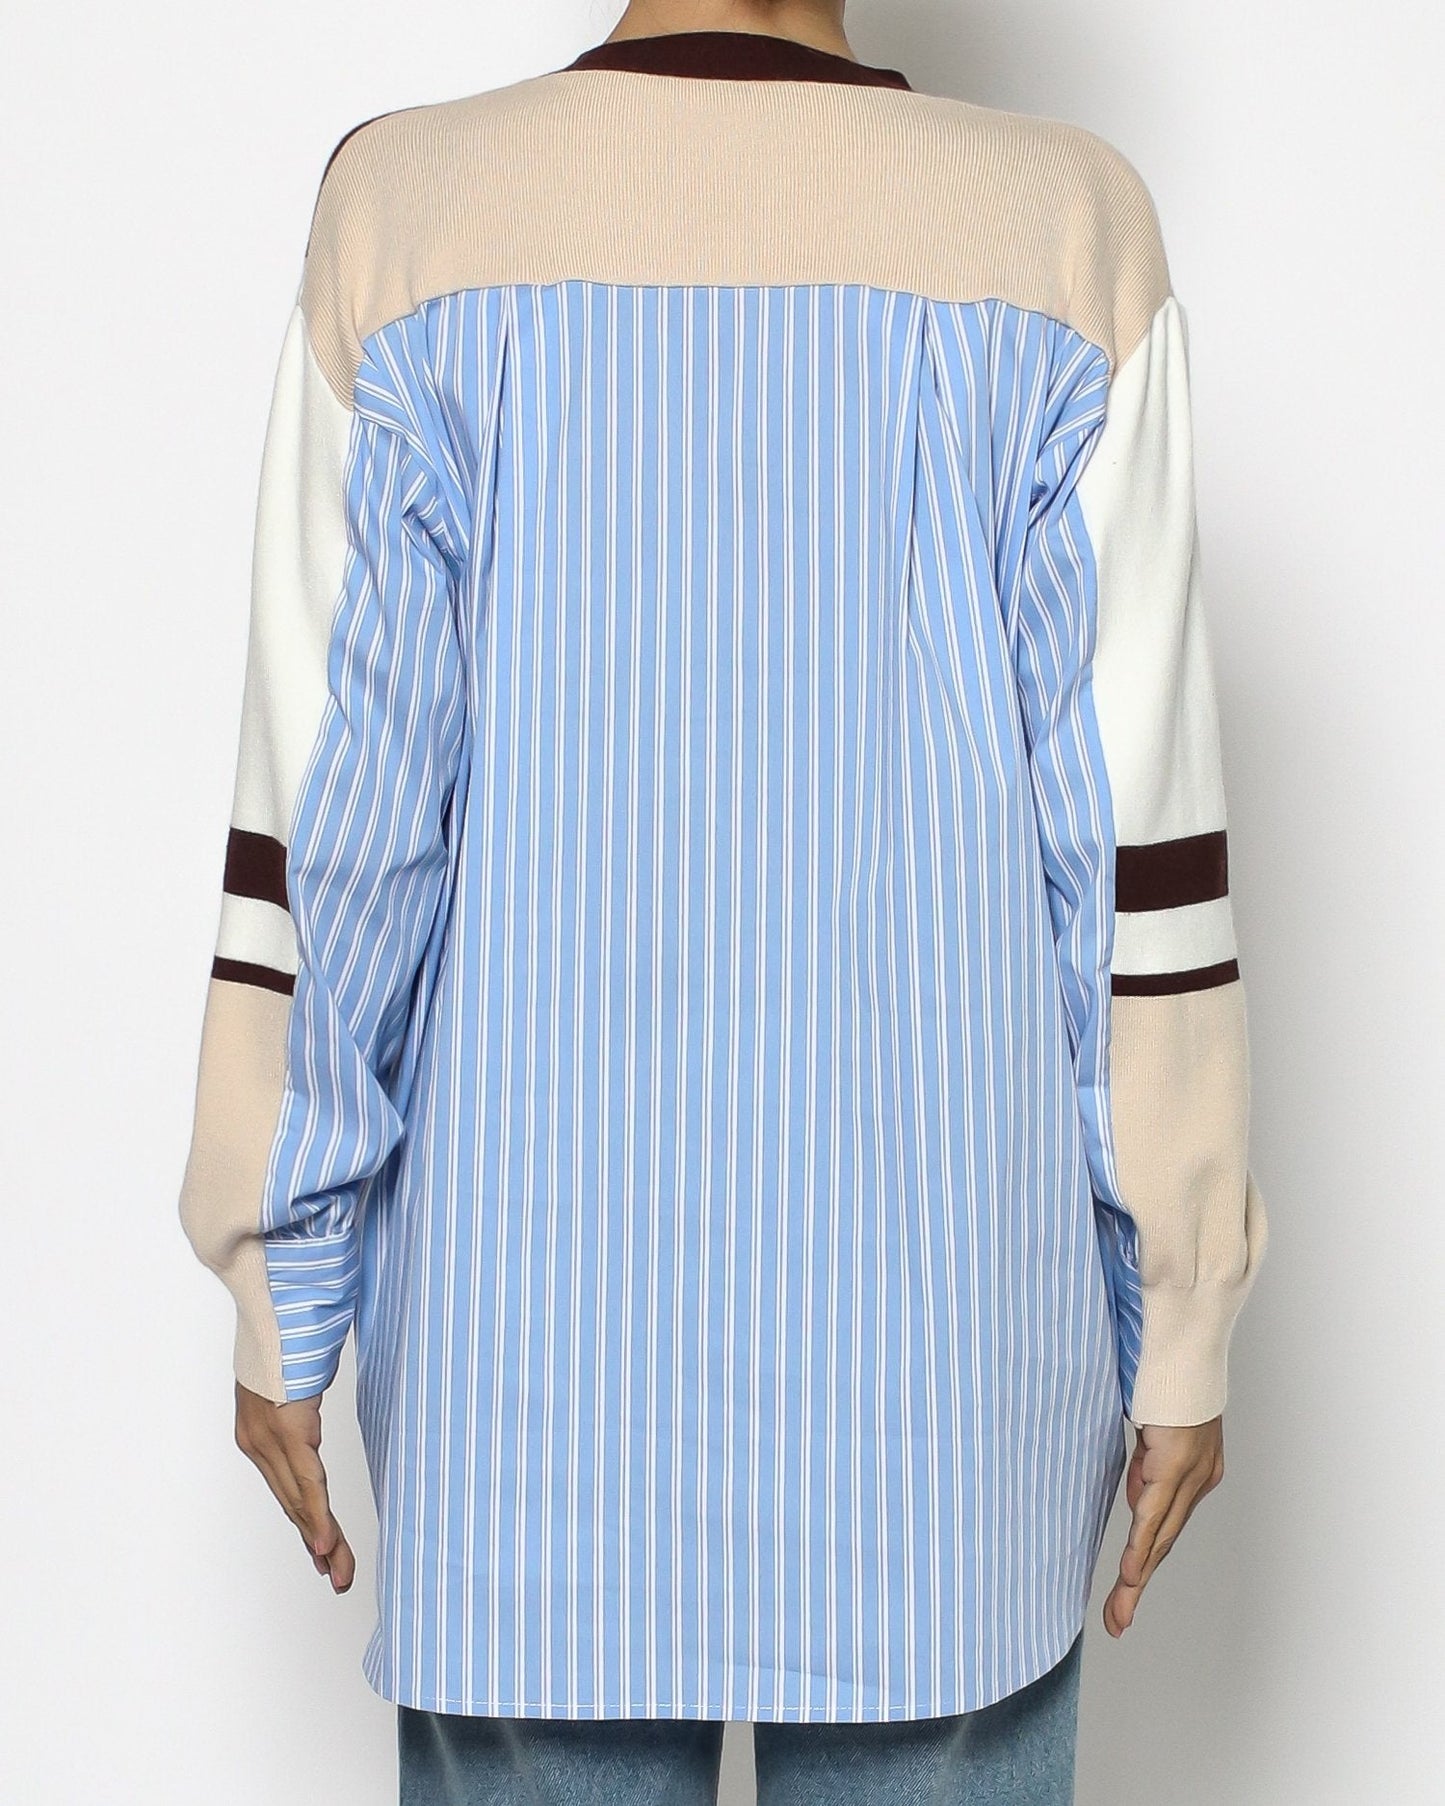 nude brown & ivory with blue shirt stripes knitted cardigan